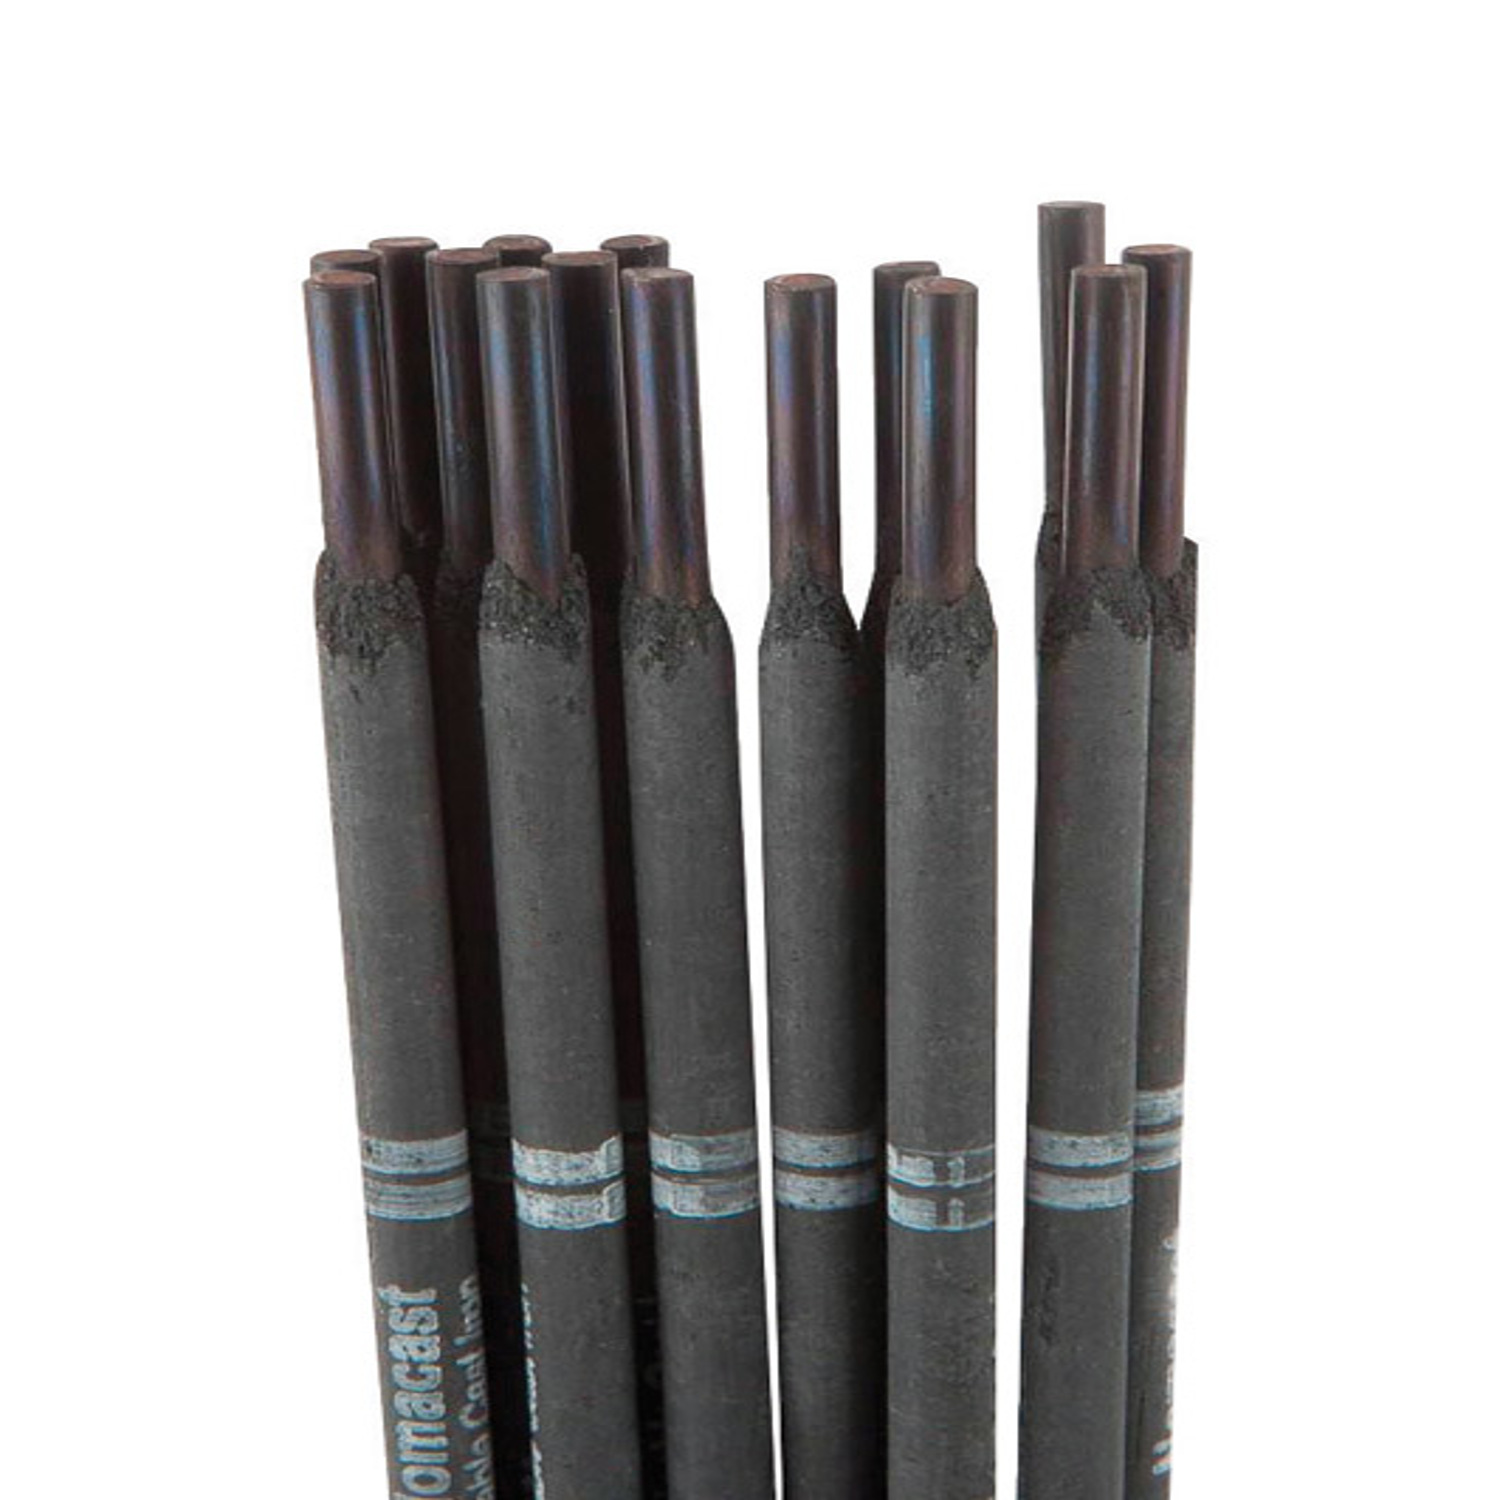 Forney 1/8 in. D X 15.3 in. L Non-Machinable Cast Iron Welding Rods 62000 psi 1 lb